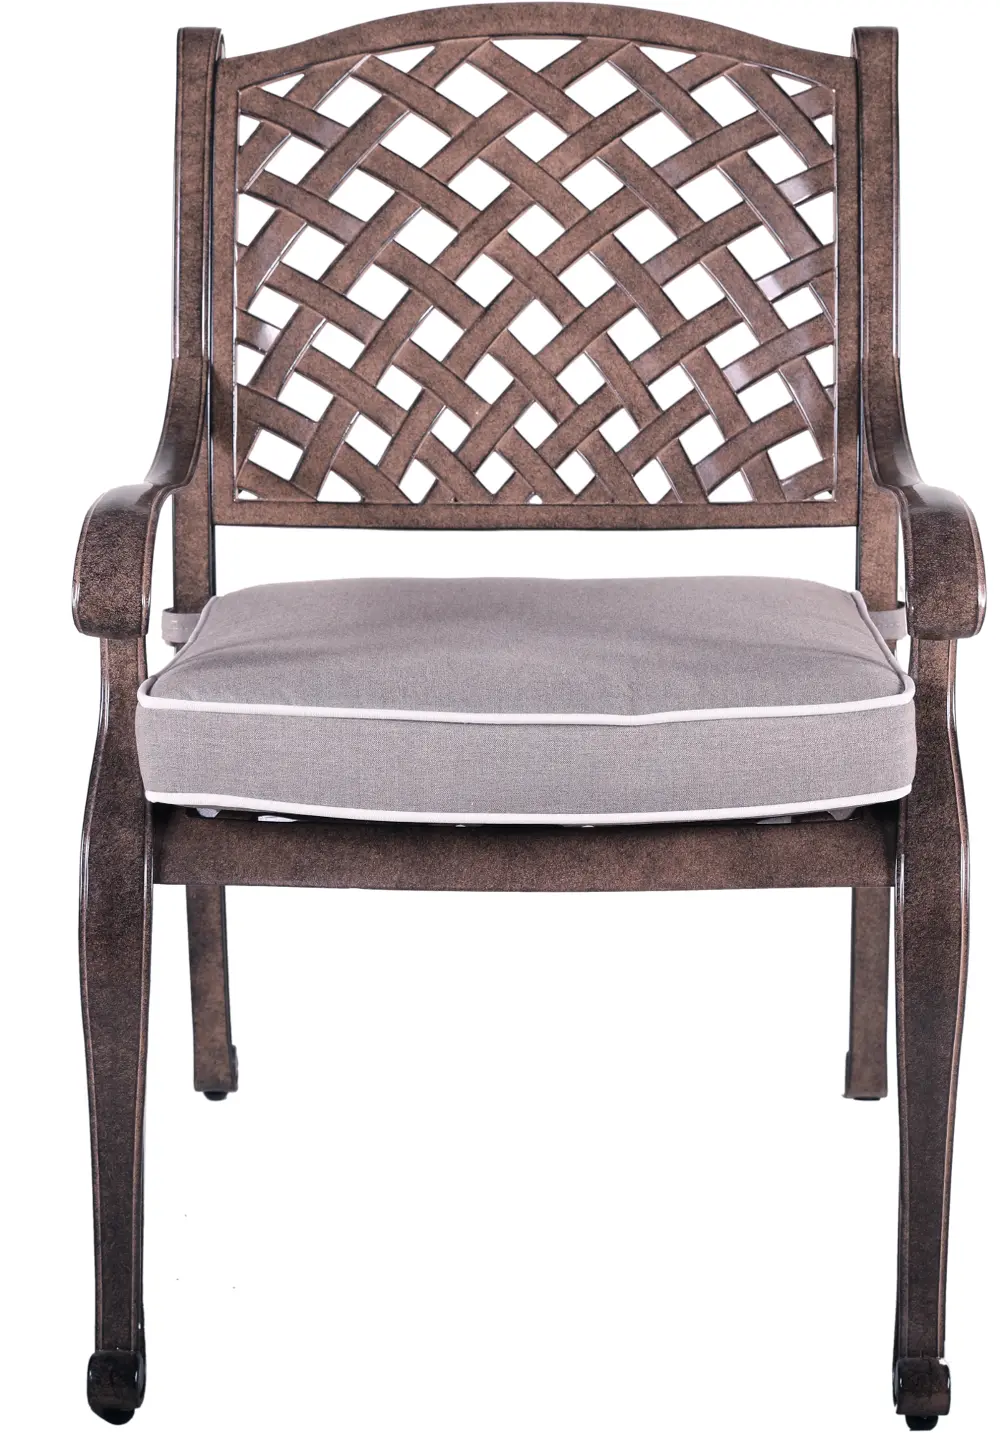 Light Brown Patio Chair and Cushion - Castle Rock-1